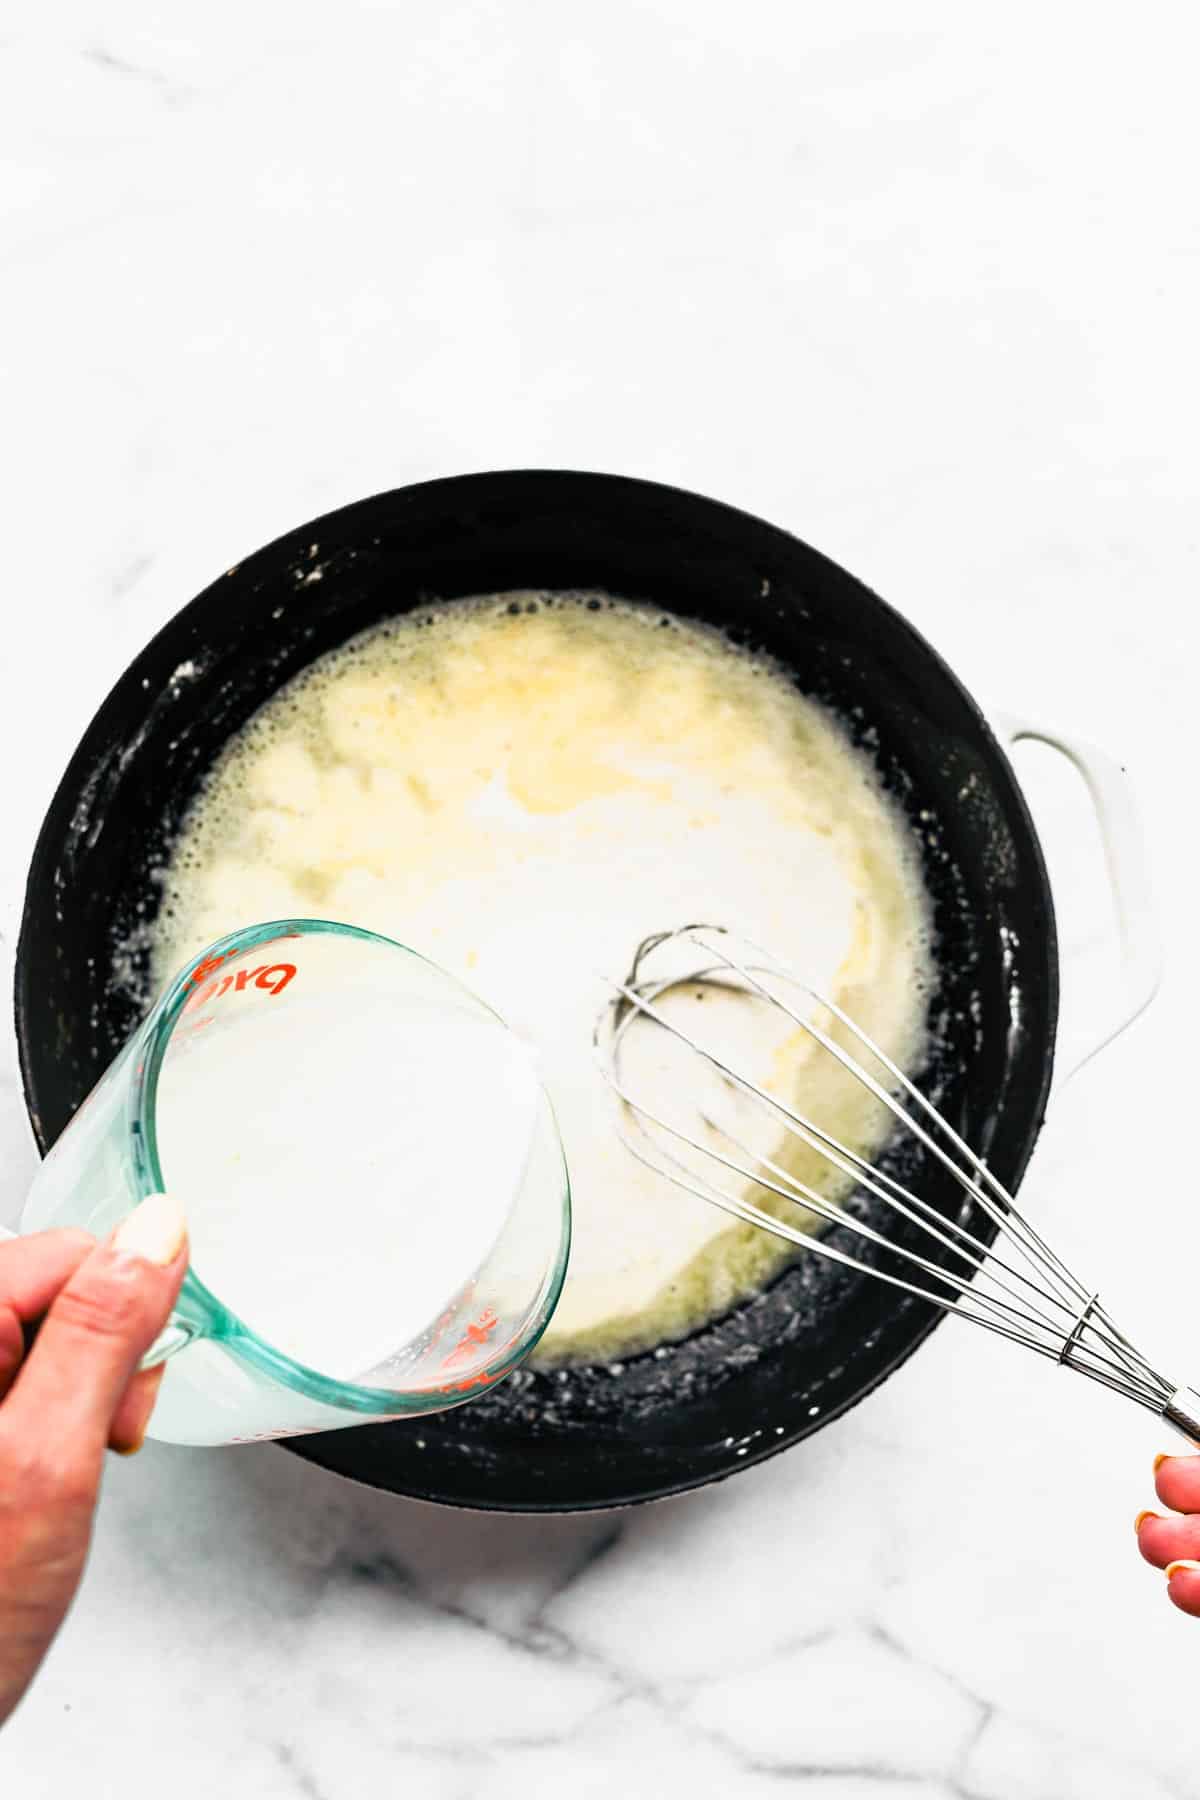 A woman's hand whisking coconut milk into a pan of melted butter and flour.